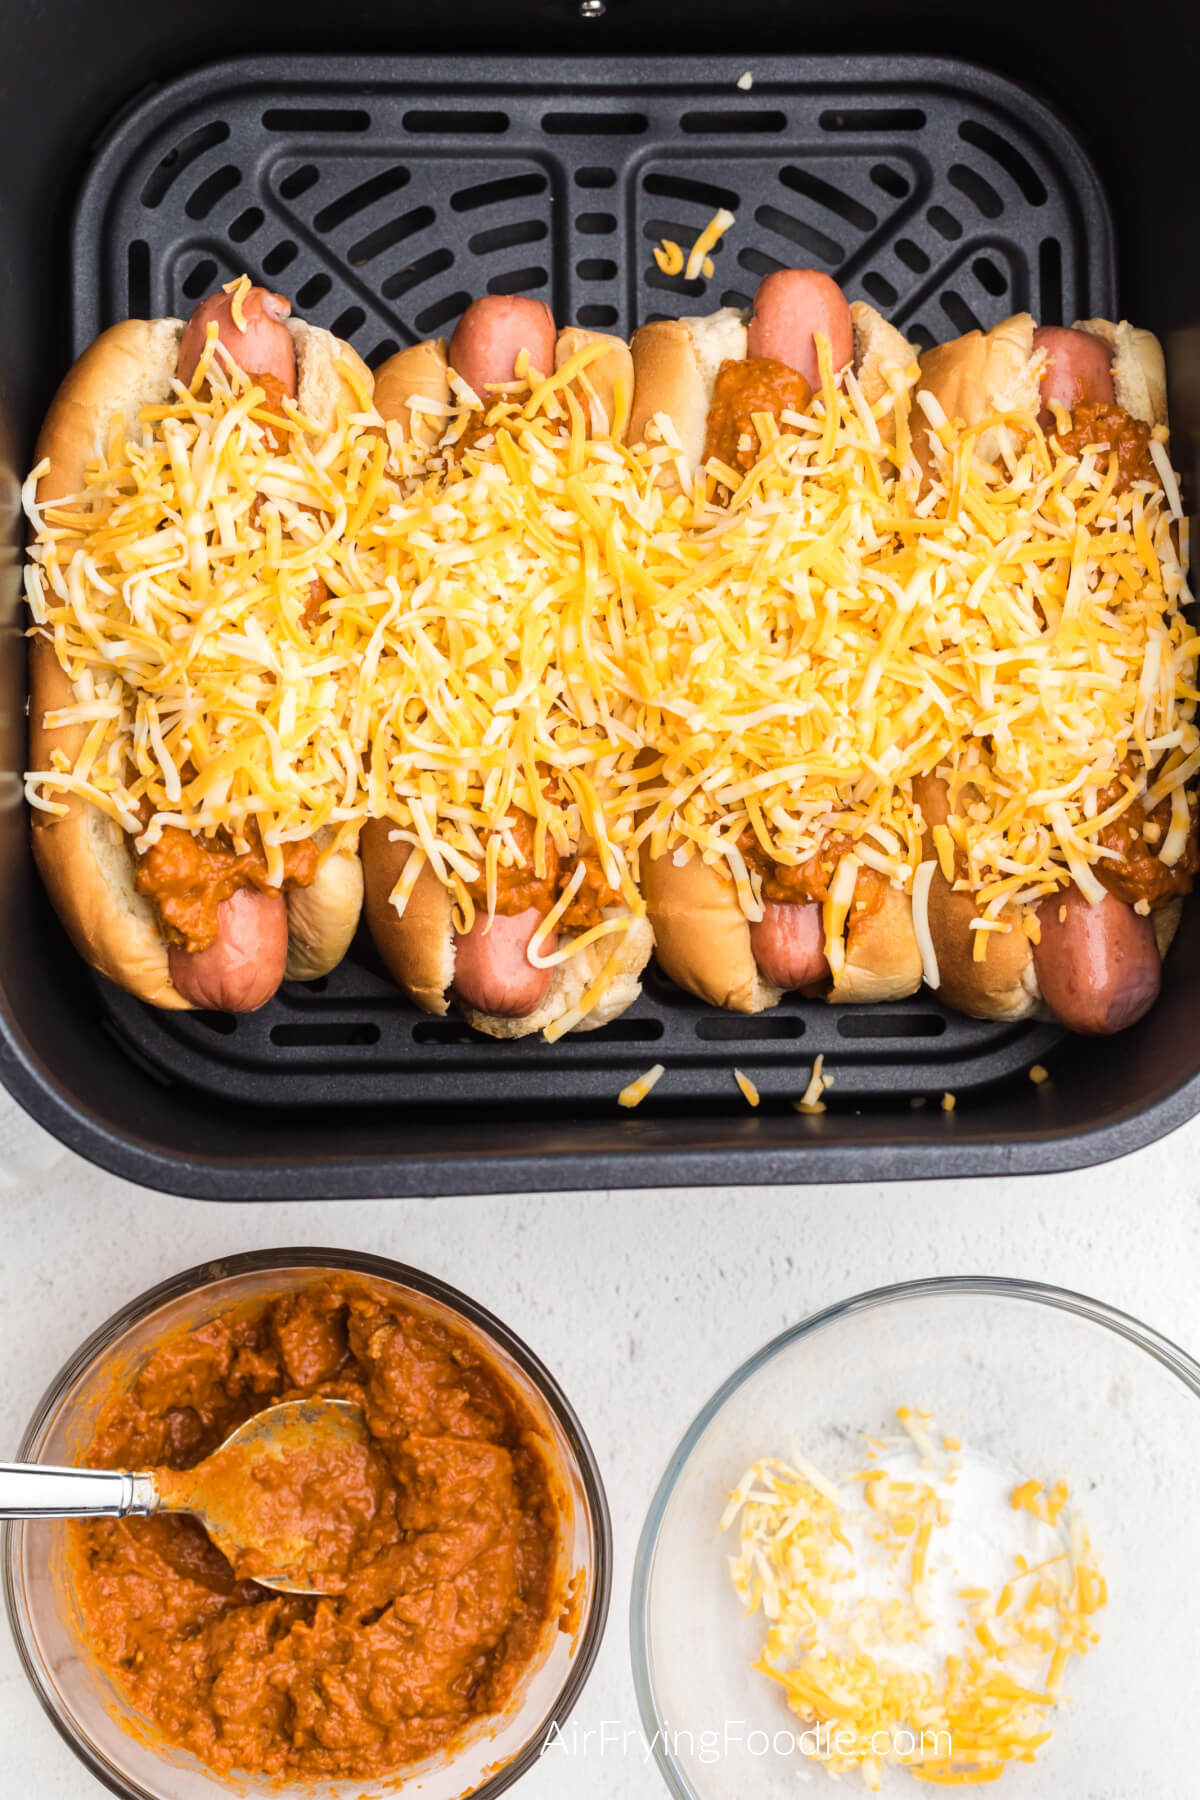 Hot dogs topped with chili and cheese in the air fryer basket, ready to be air fried. 